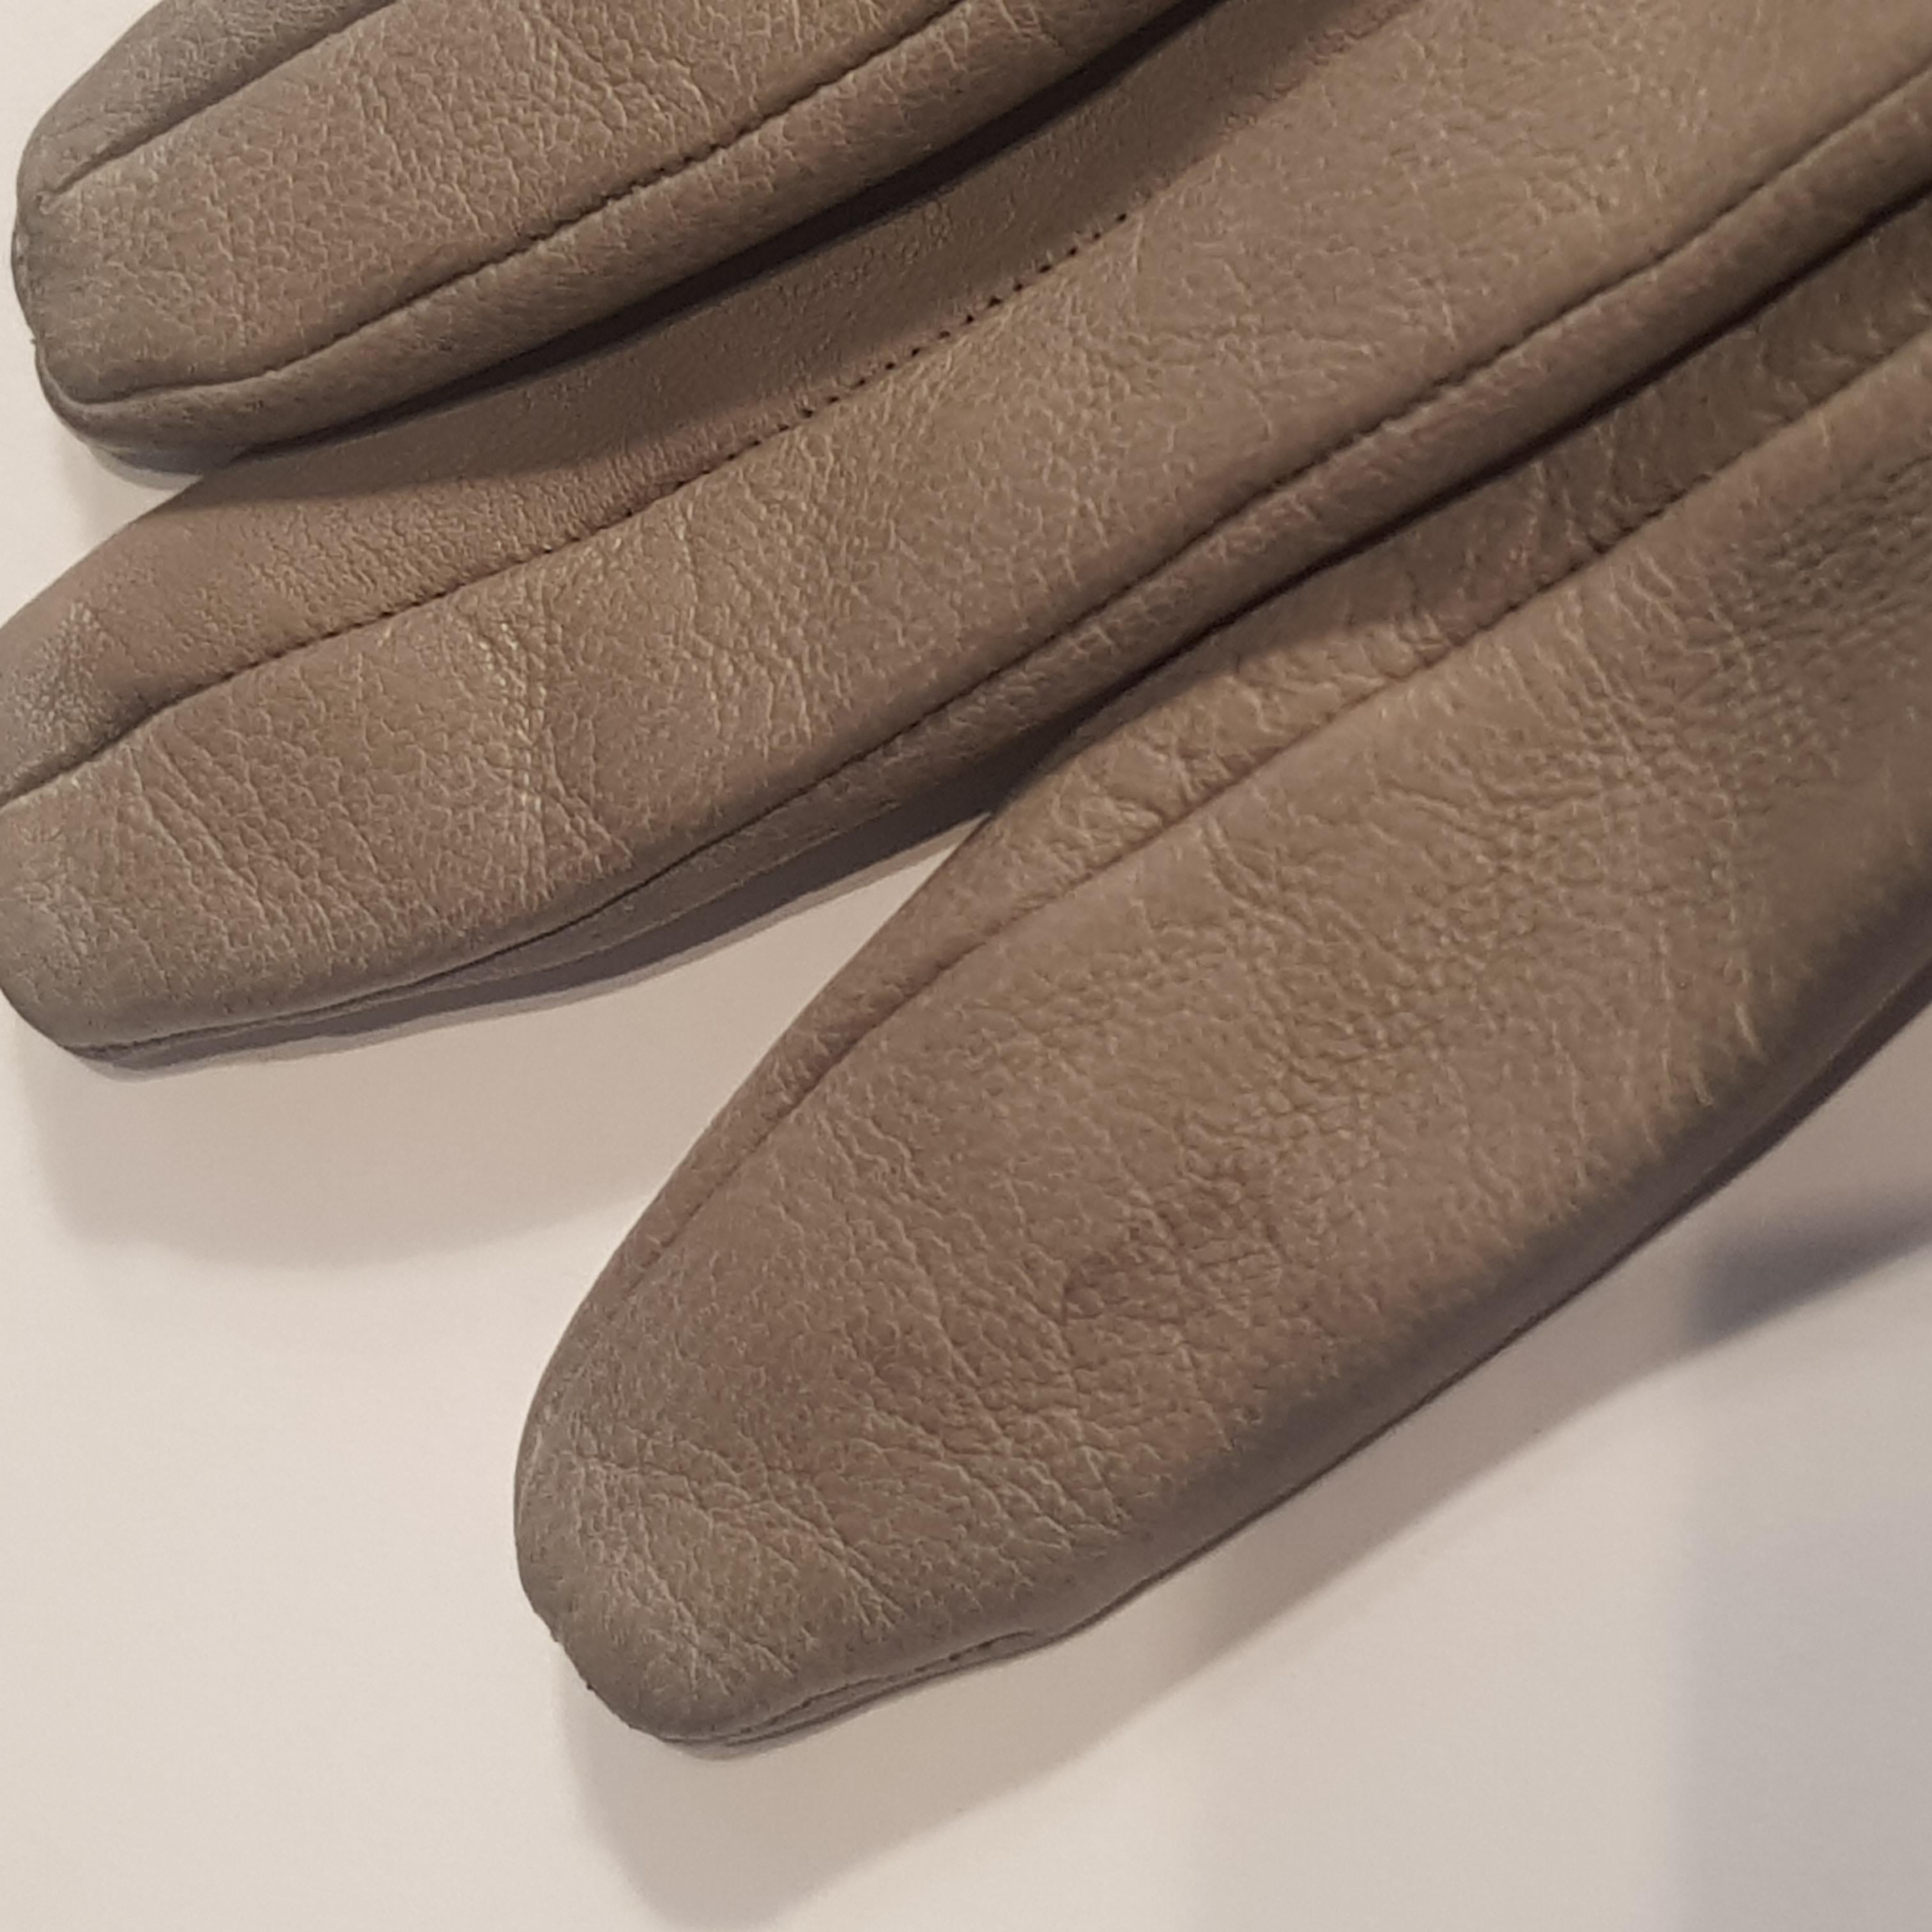 Women's Hermès Mouse Grey Leather Gloves